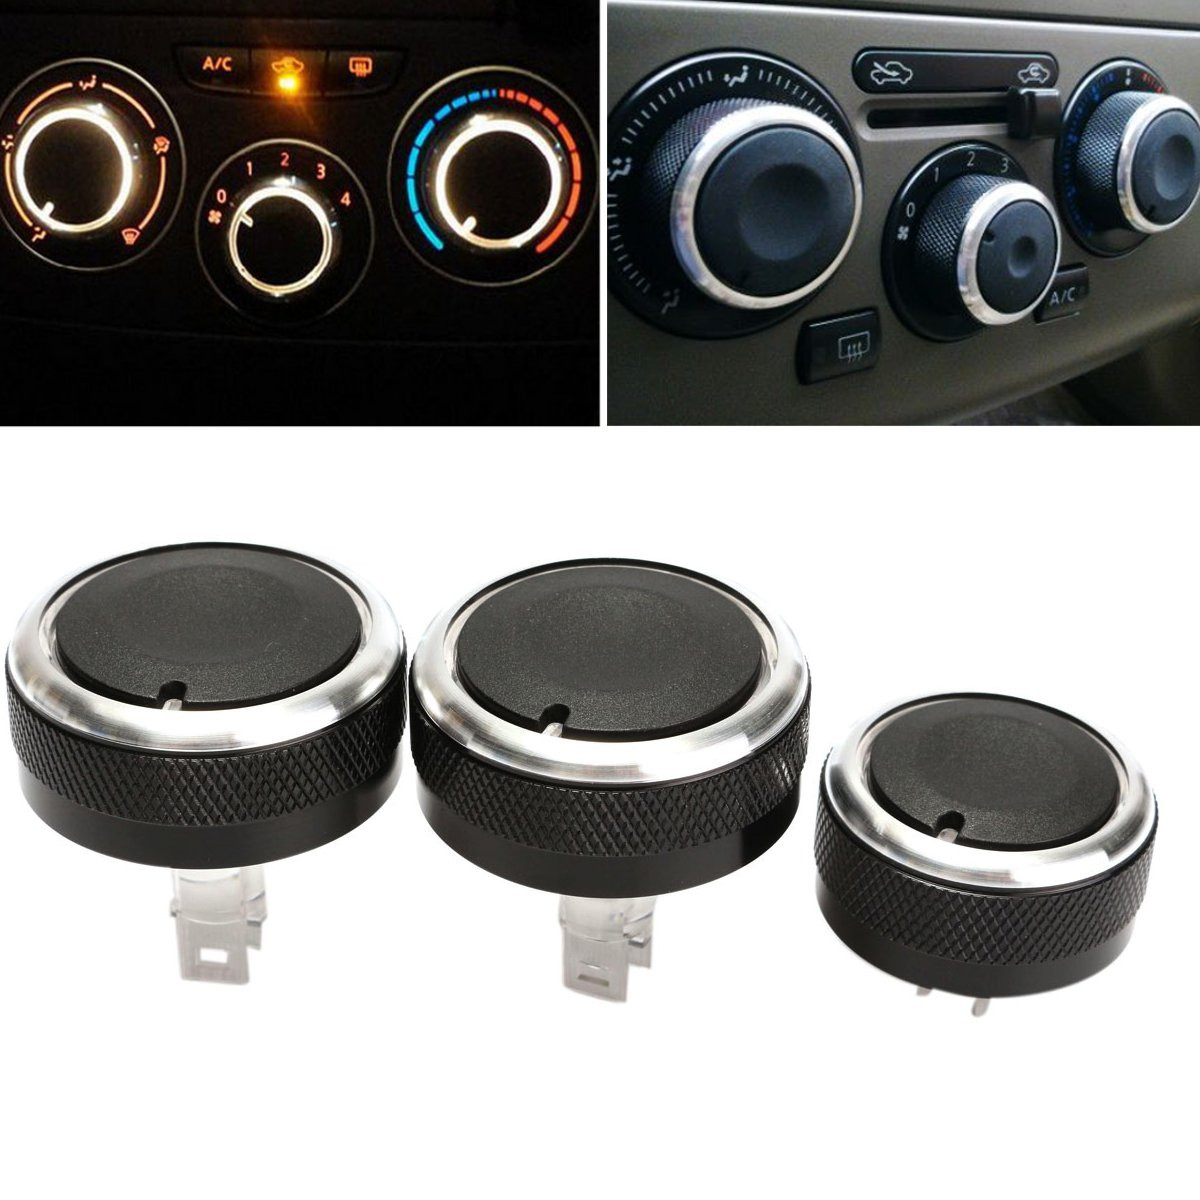 

3pcs Air Conditioning Switch Knob Buttons For LIVINA/TIIDA/GENISS/NV200